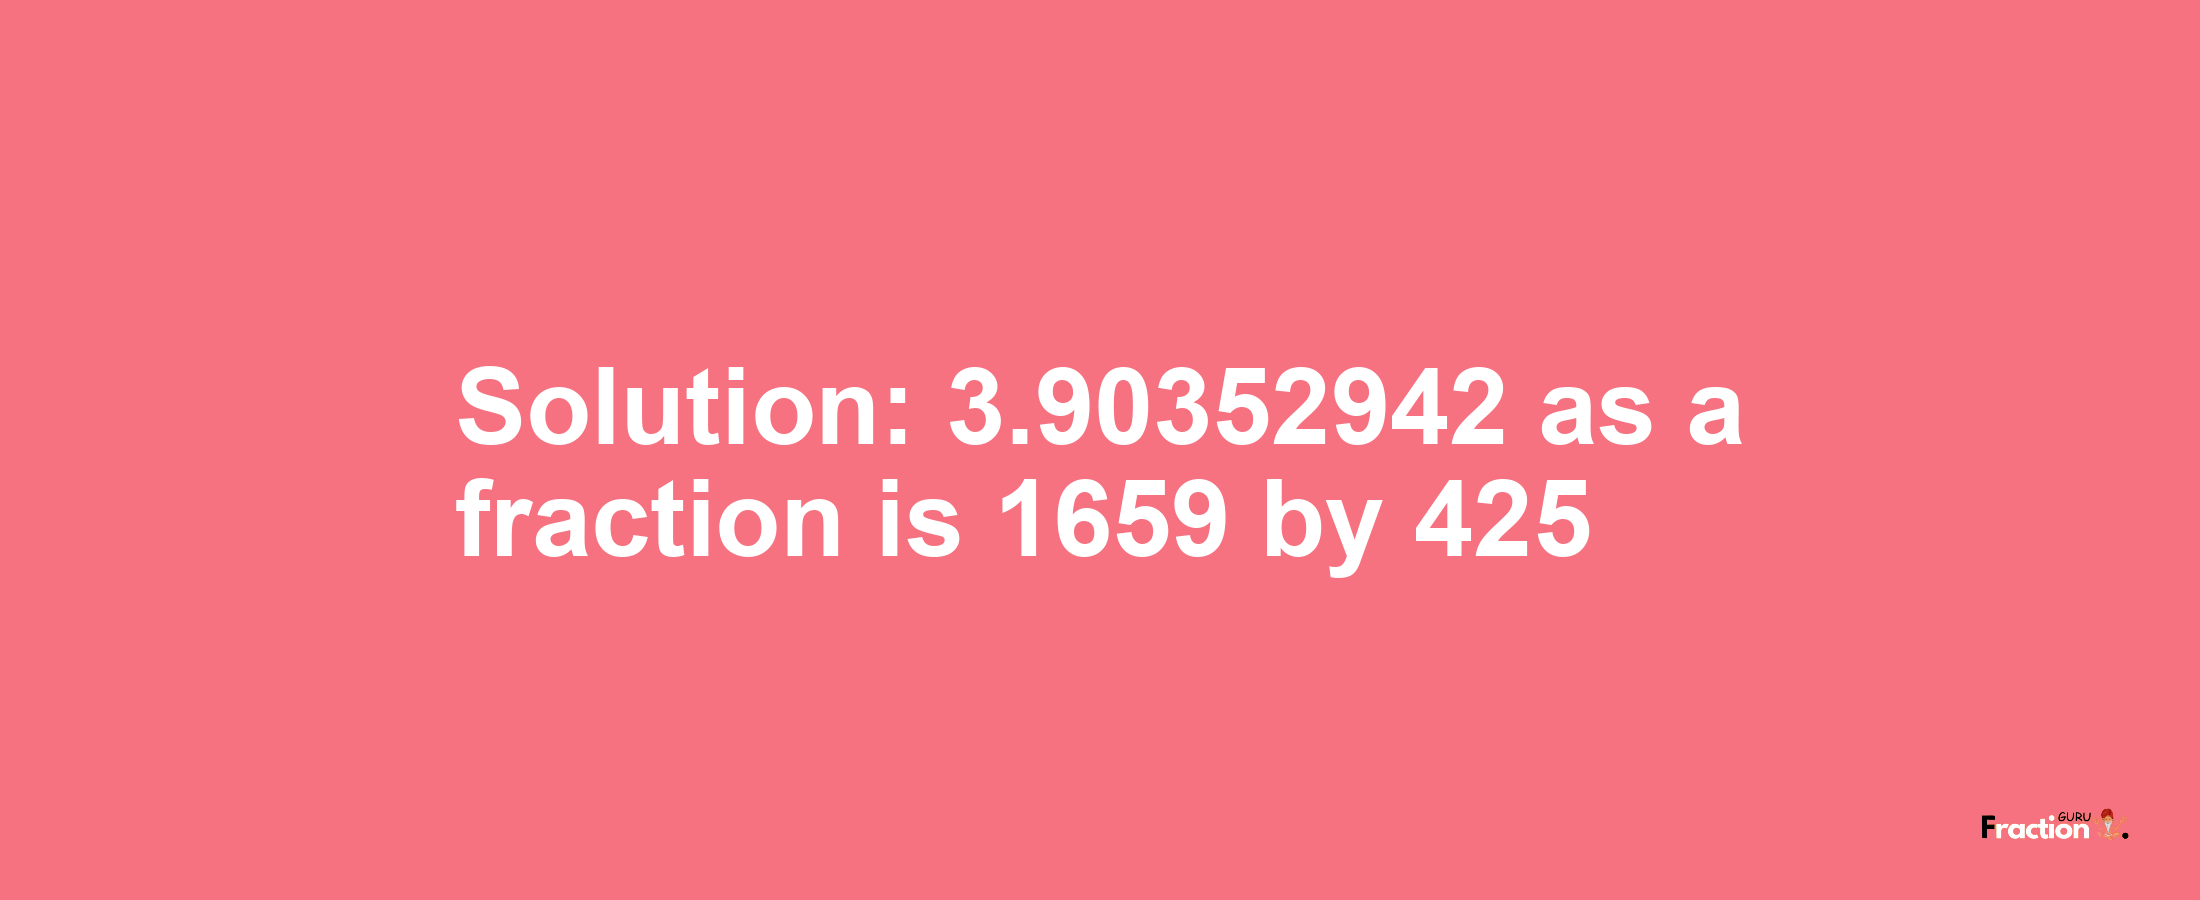 Solution:3.90352942 as a fraction is 1659/425